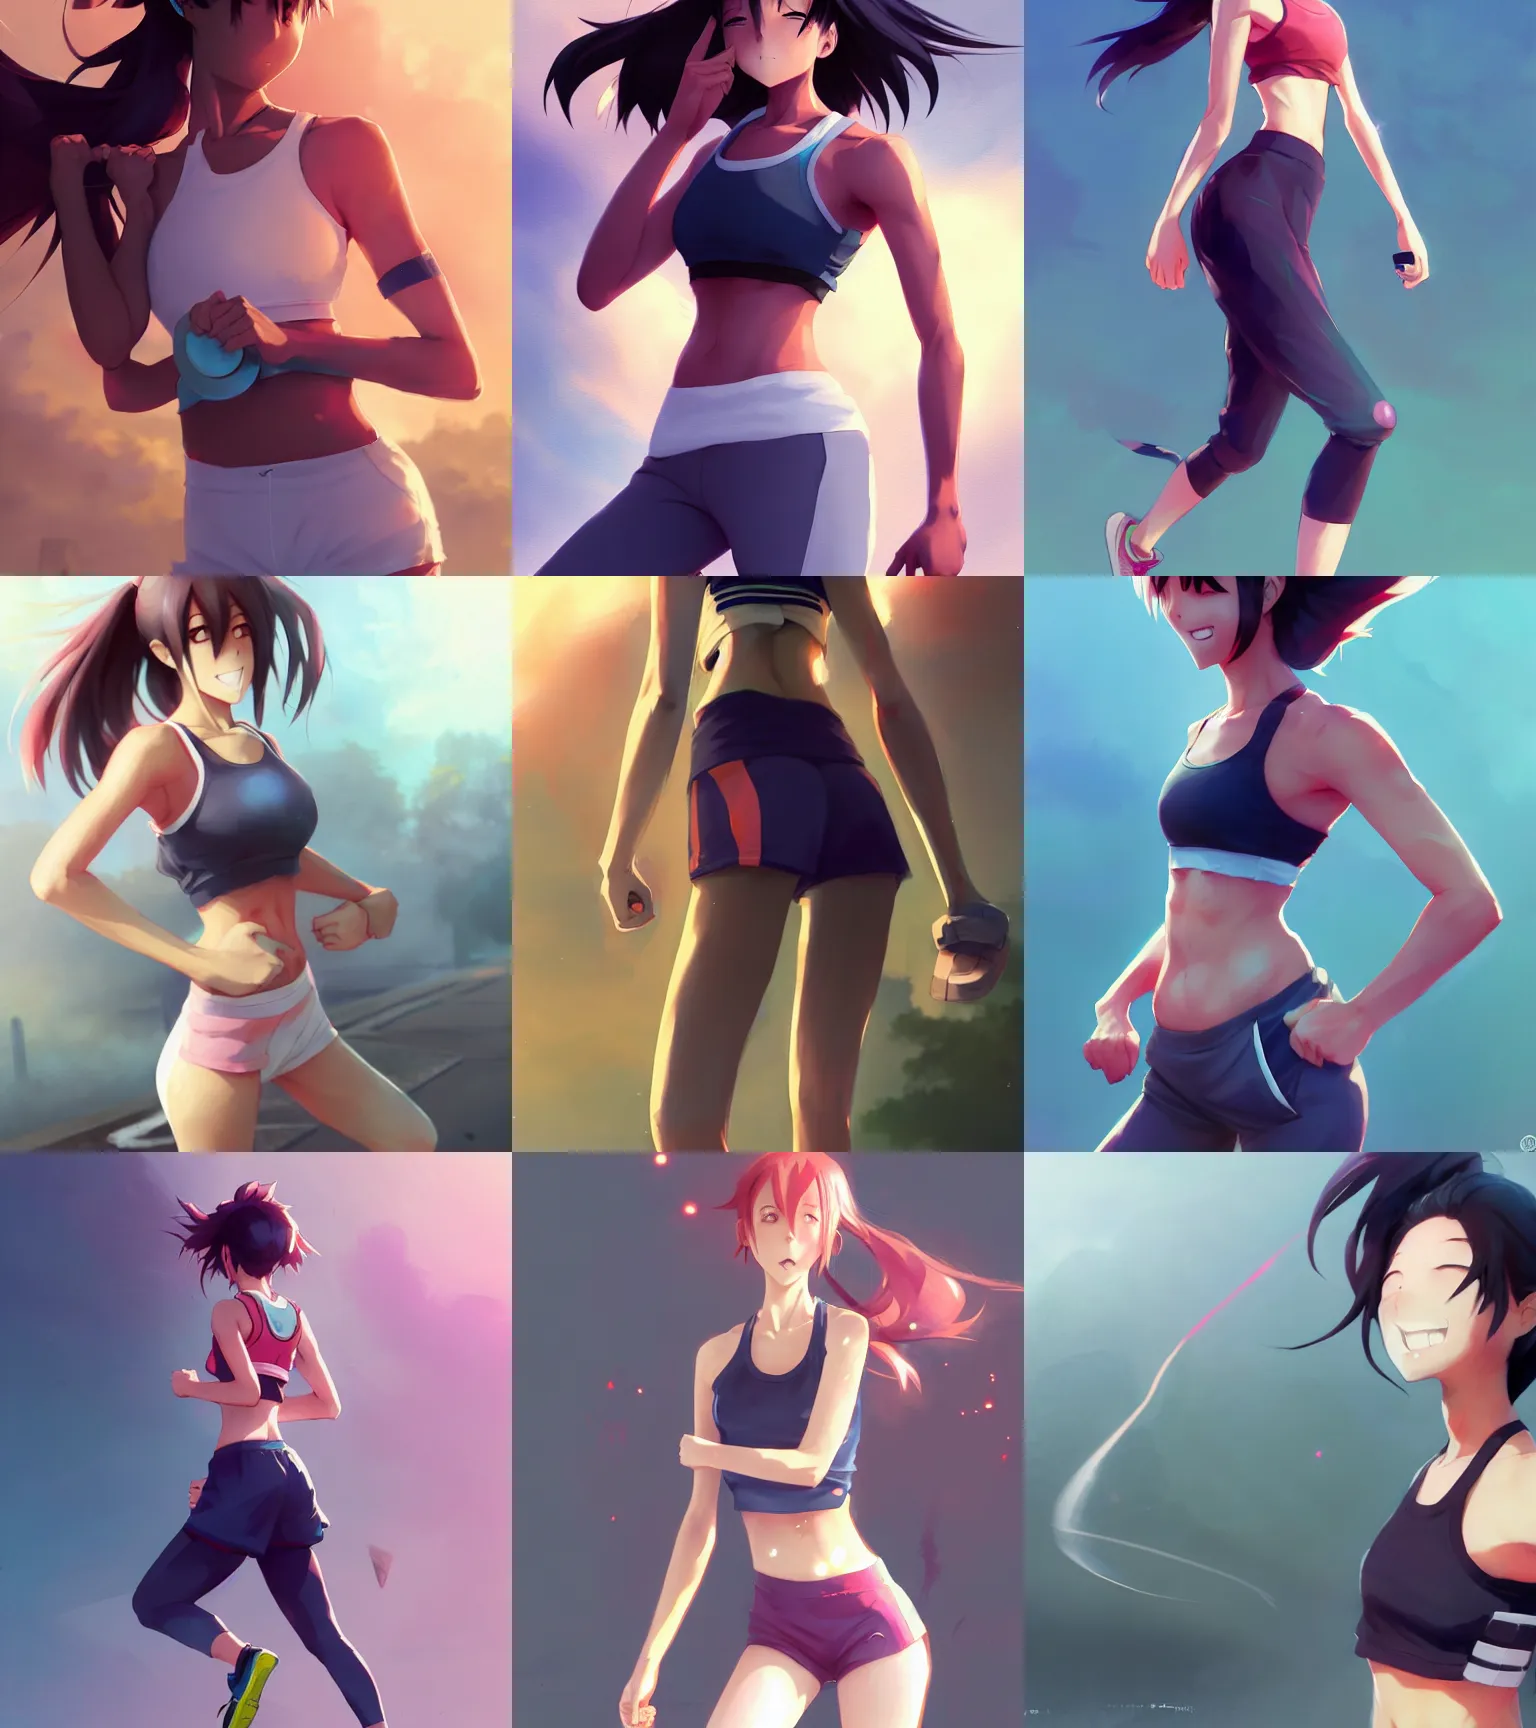 attractive anime girl jogging, sports bra and